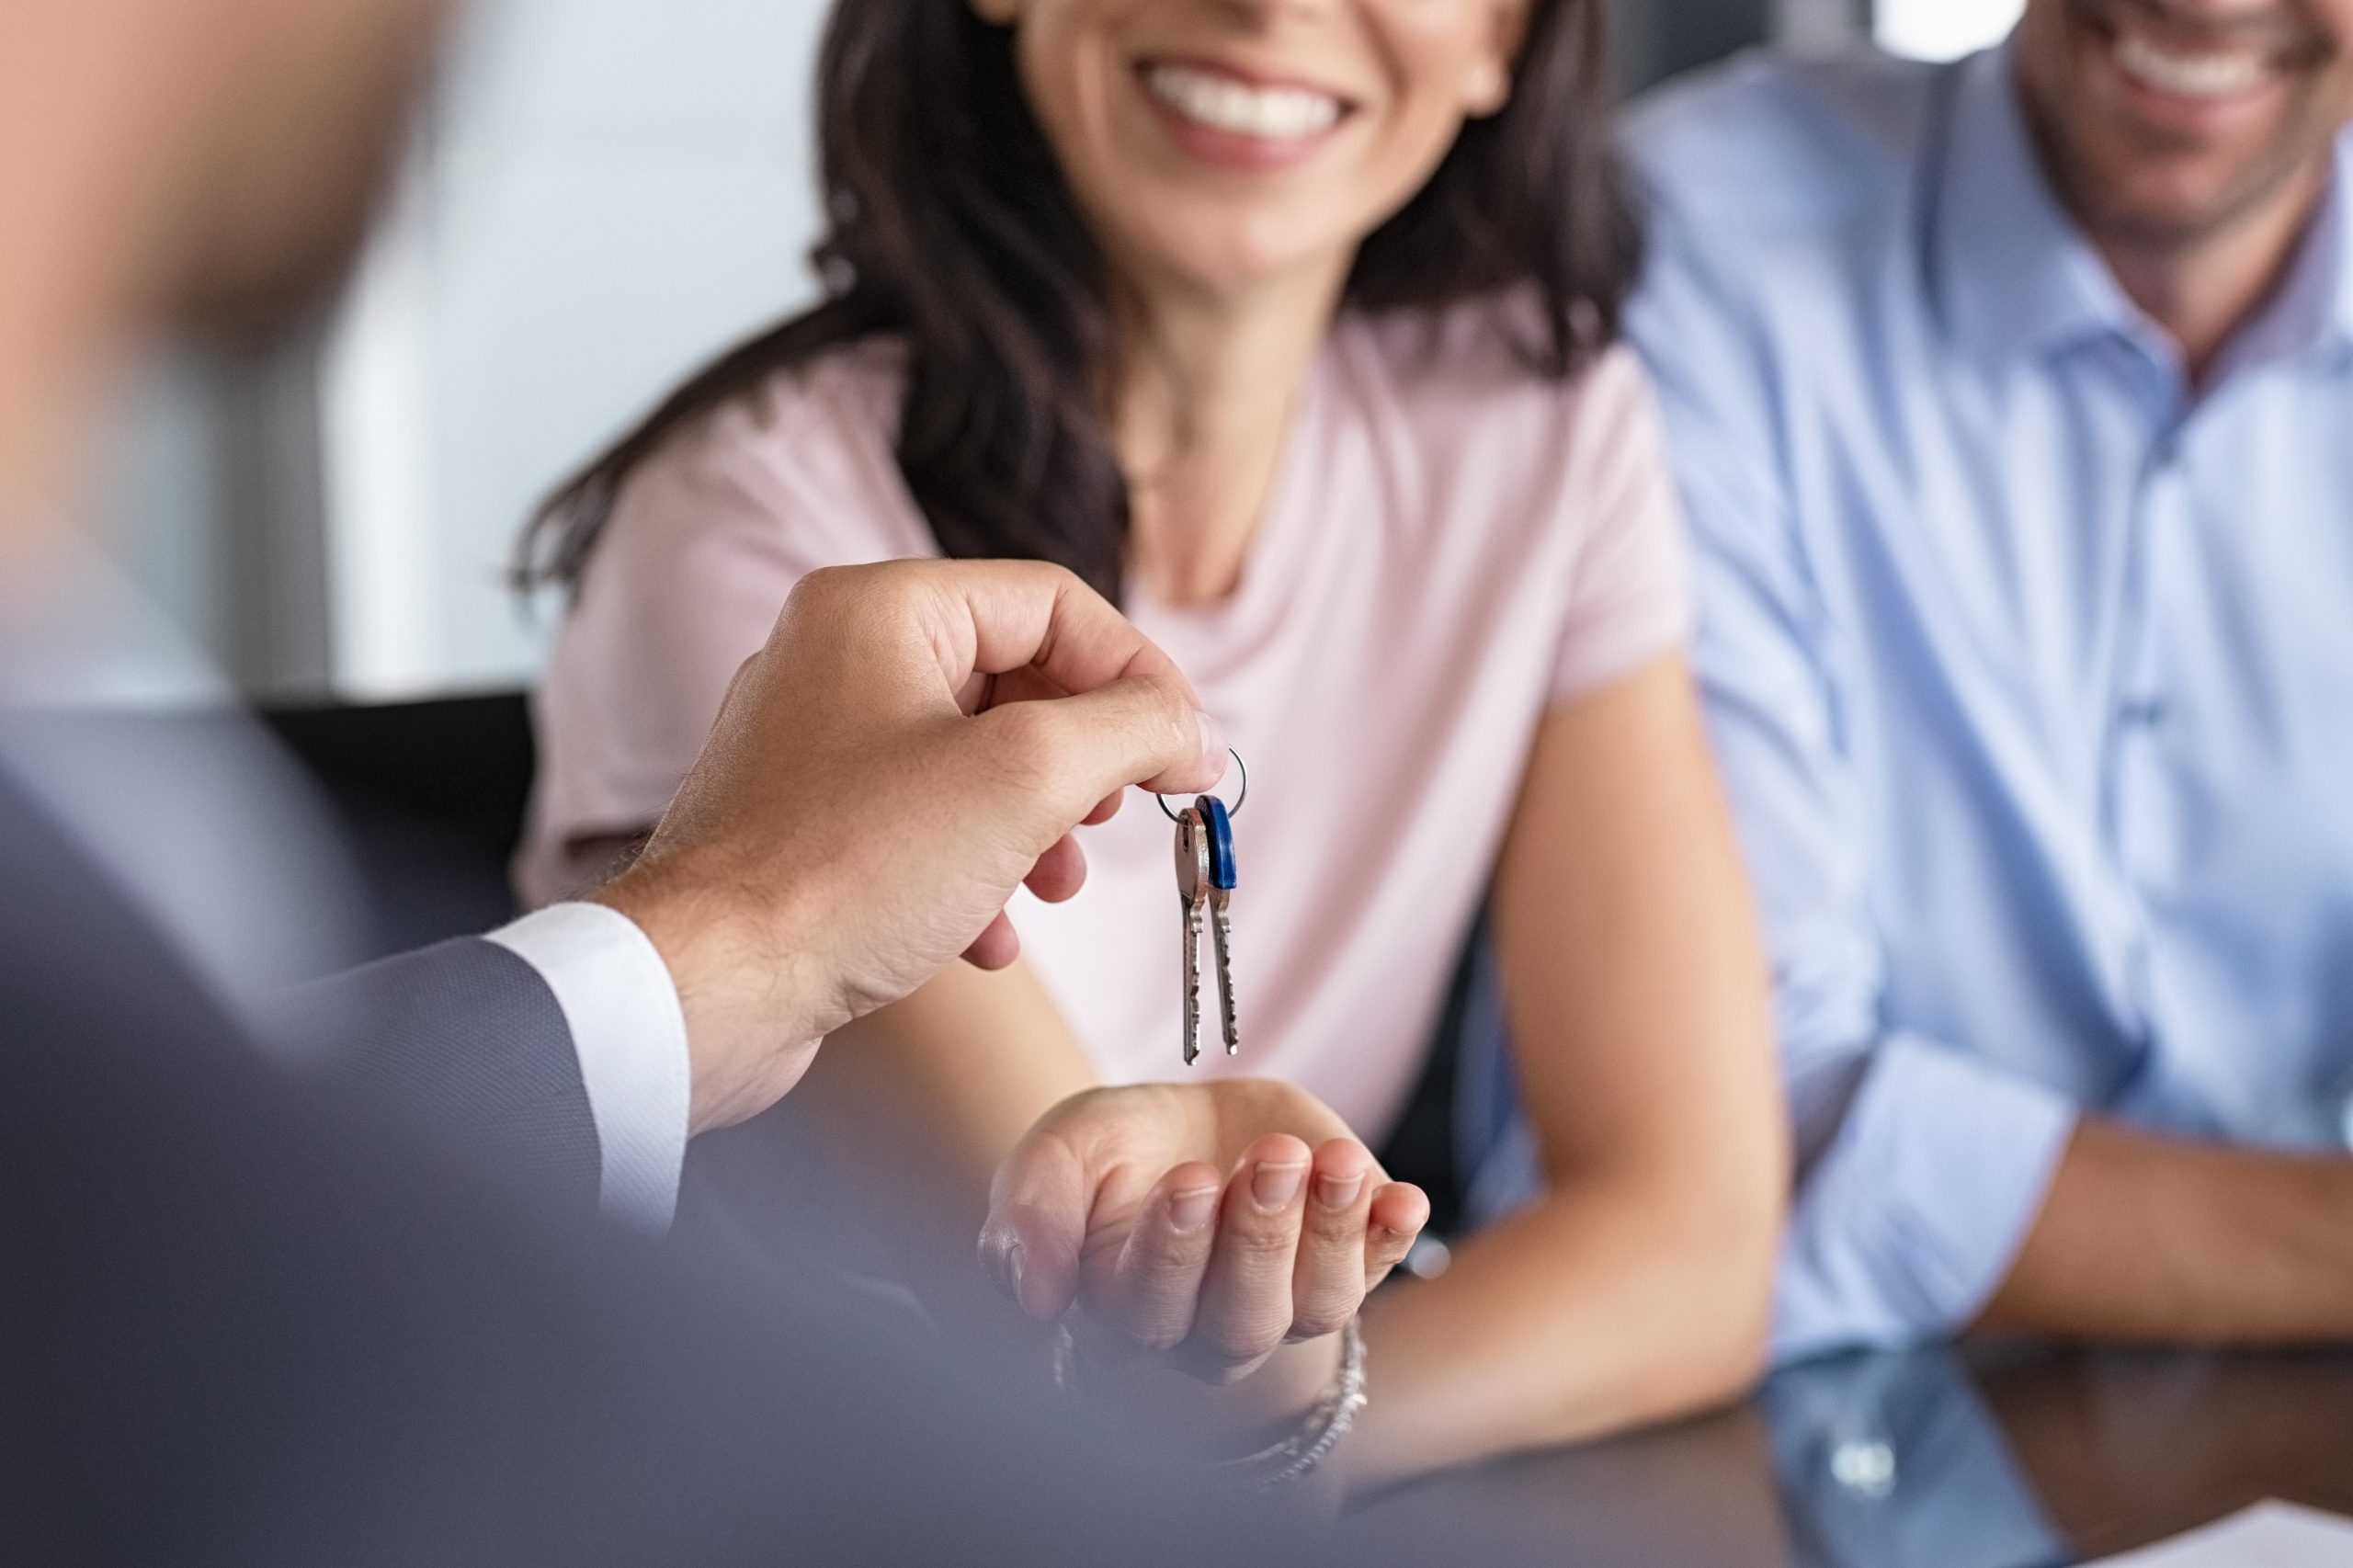 real-estate-agent-giving-house-keys-to-woman-UW7TA2X-min